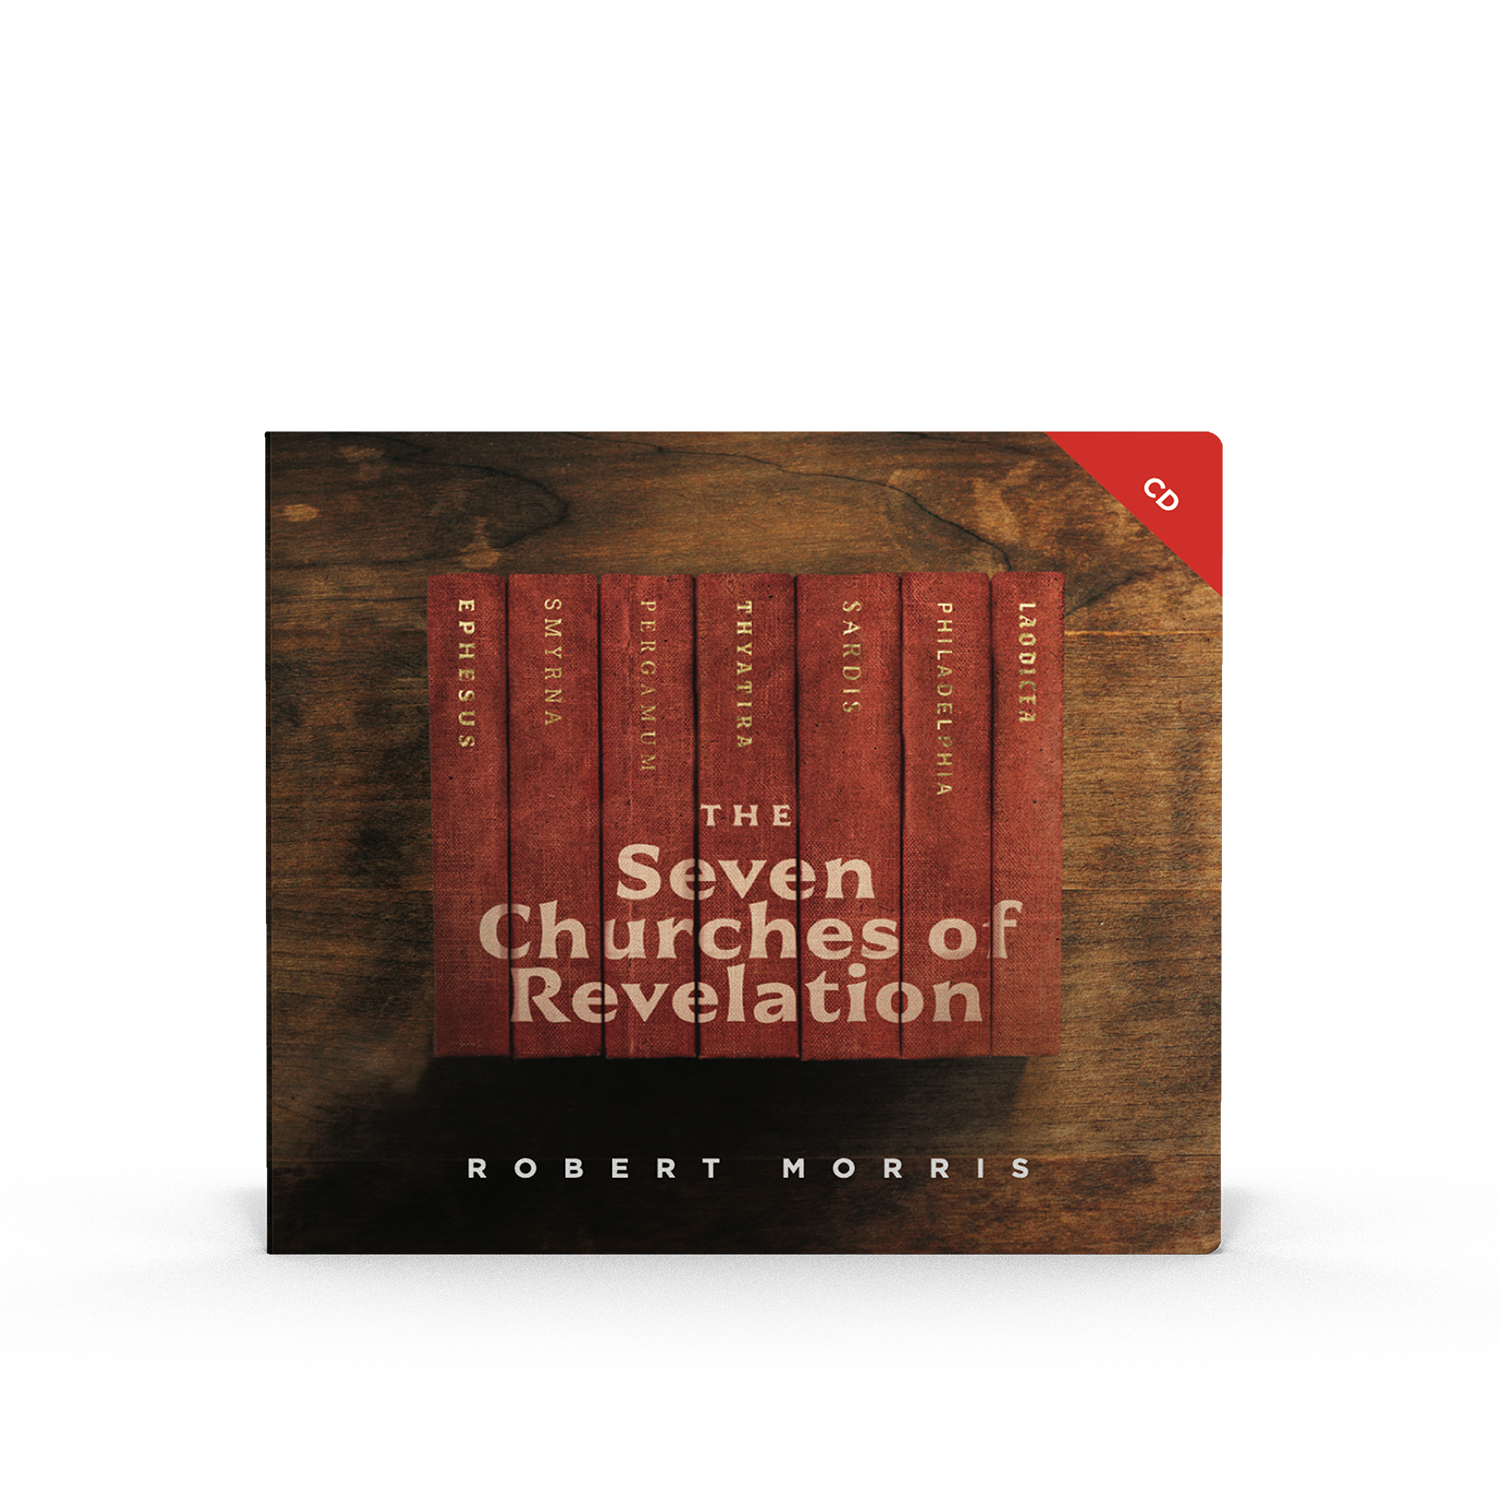 Special Offer: The Seven Churches of Revelation CD